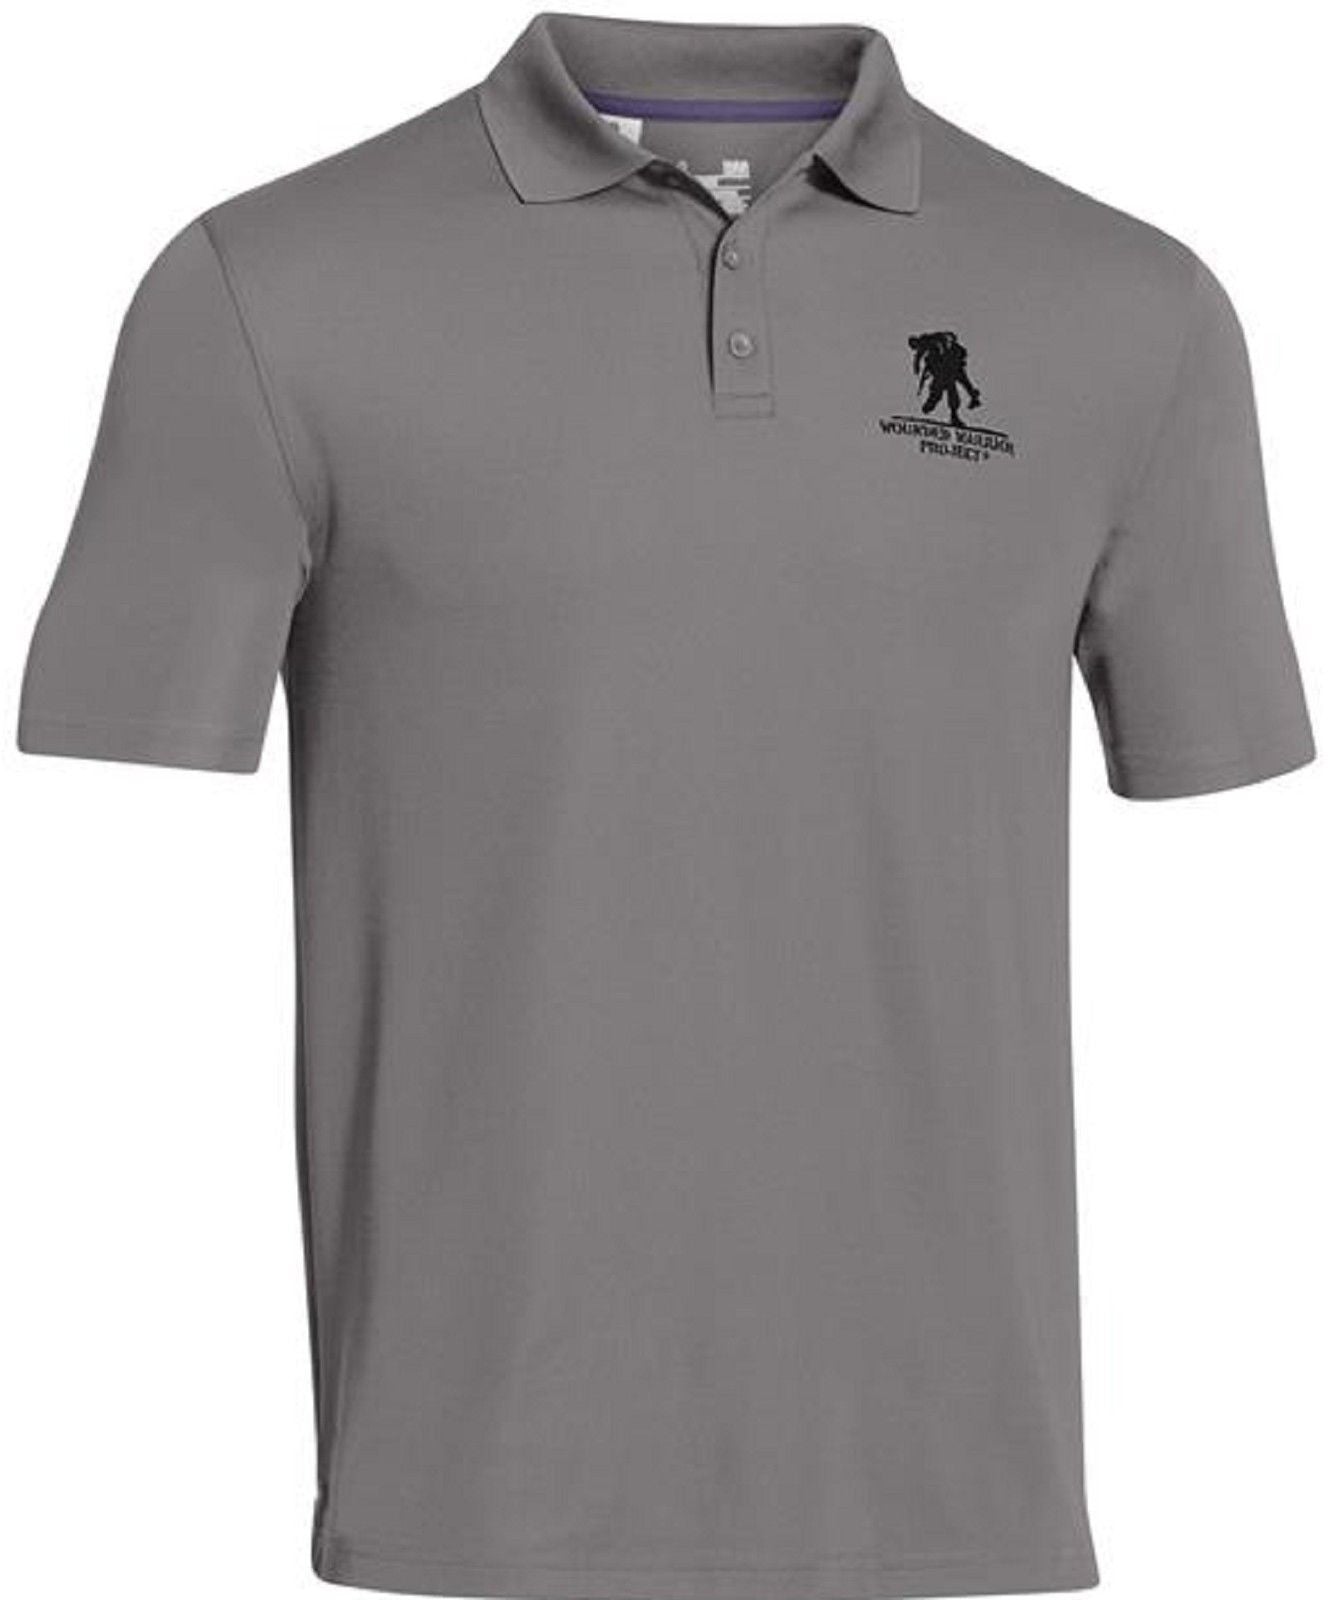 wounded warrior golf shirts